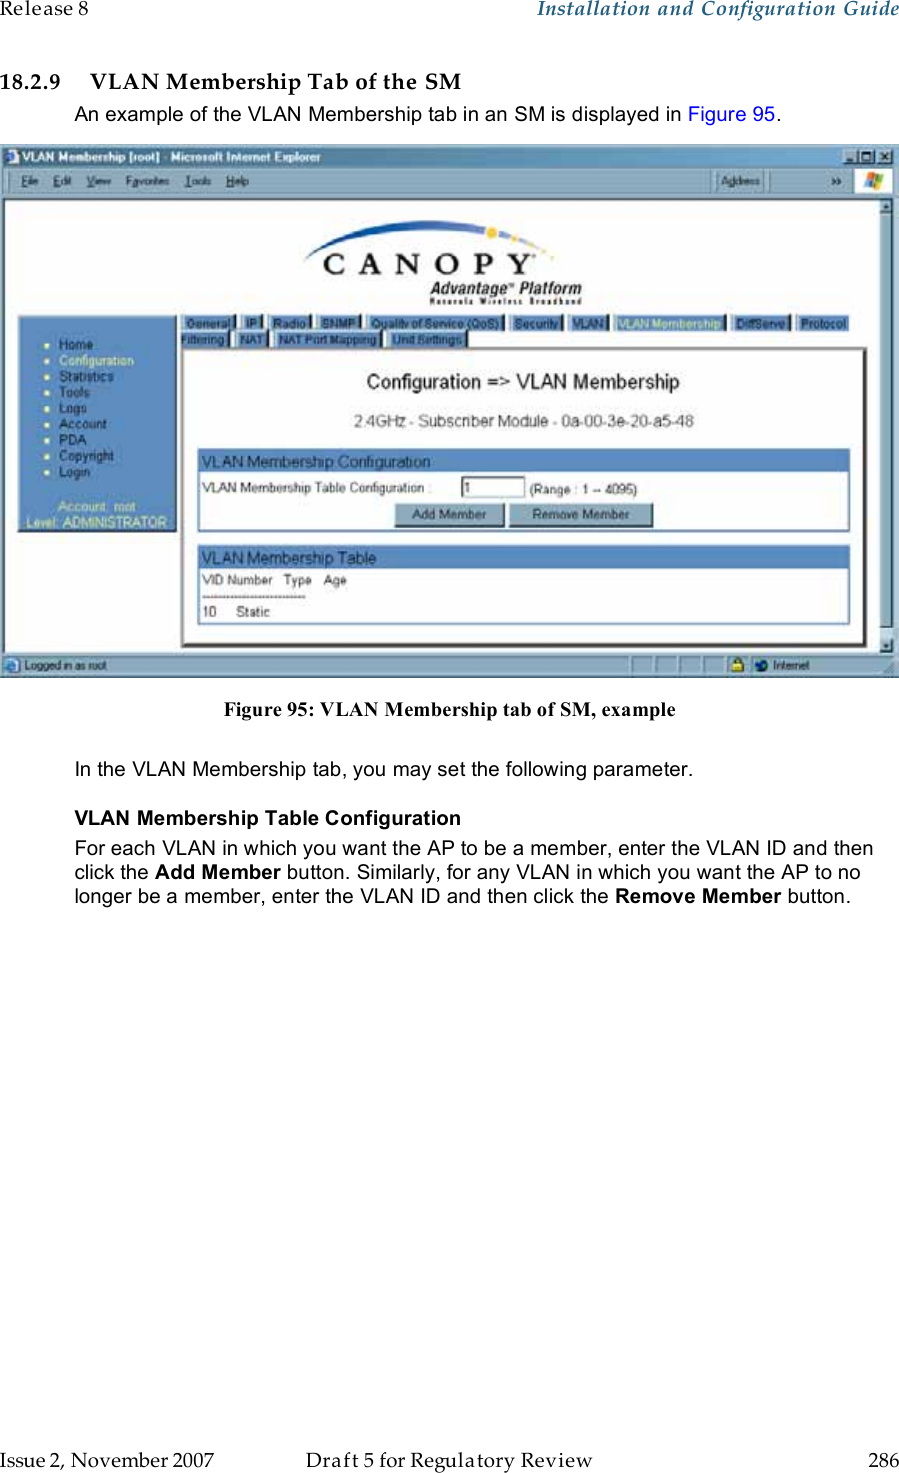 Release 8    Installation and Configuration Guide   Issue 2, November 2007  Draft 5 for Regulatory Review  286     18.2.9 VLAN Membership Tab of the SM An example of the VLAN Membership tab in an SM is displayed in Figure 95.  Figure 95: VLAN Membership tab of SM, example  In the VLAN Membership tab, you may set the following parameter. VLAN Membership Table Configuration For each VLAN in which you want the AP to be a member, enter the VLAN ID and then click the Add Member button. Similarly, for any VLAN in which you want the AP to no longer be a member, enter the VLAN ID and then click the Remove Member button. 